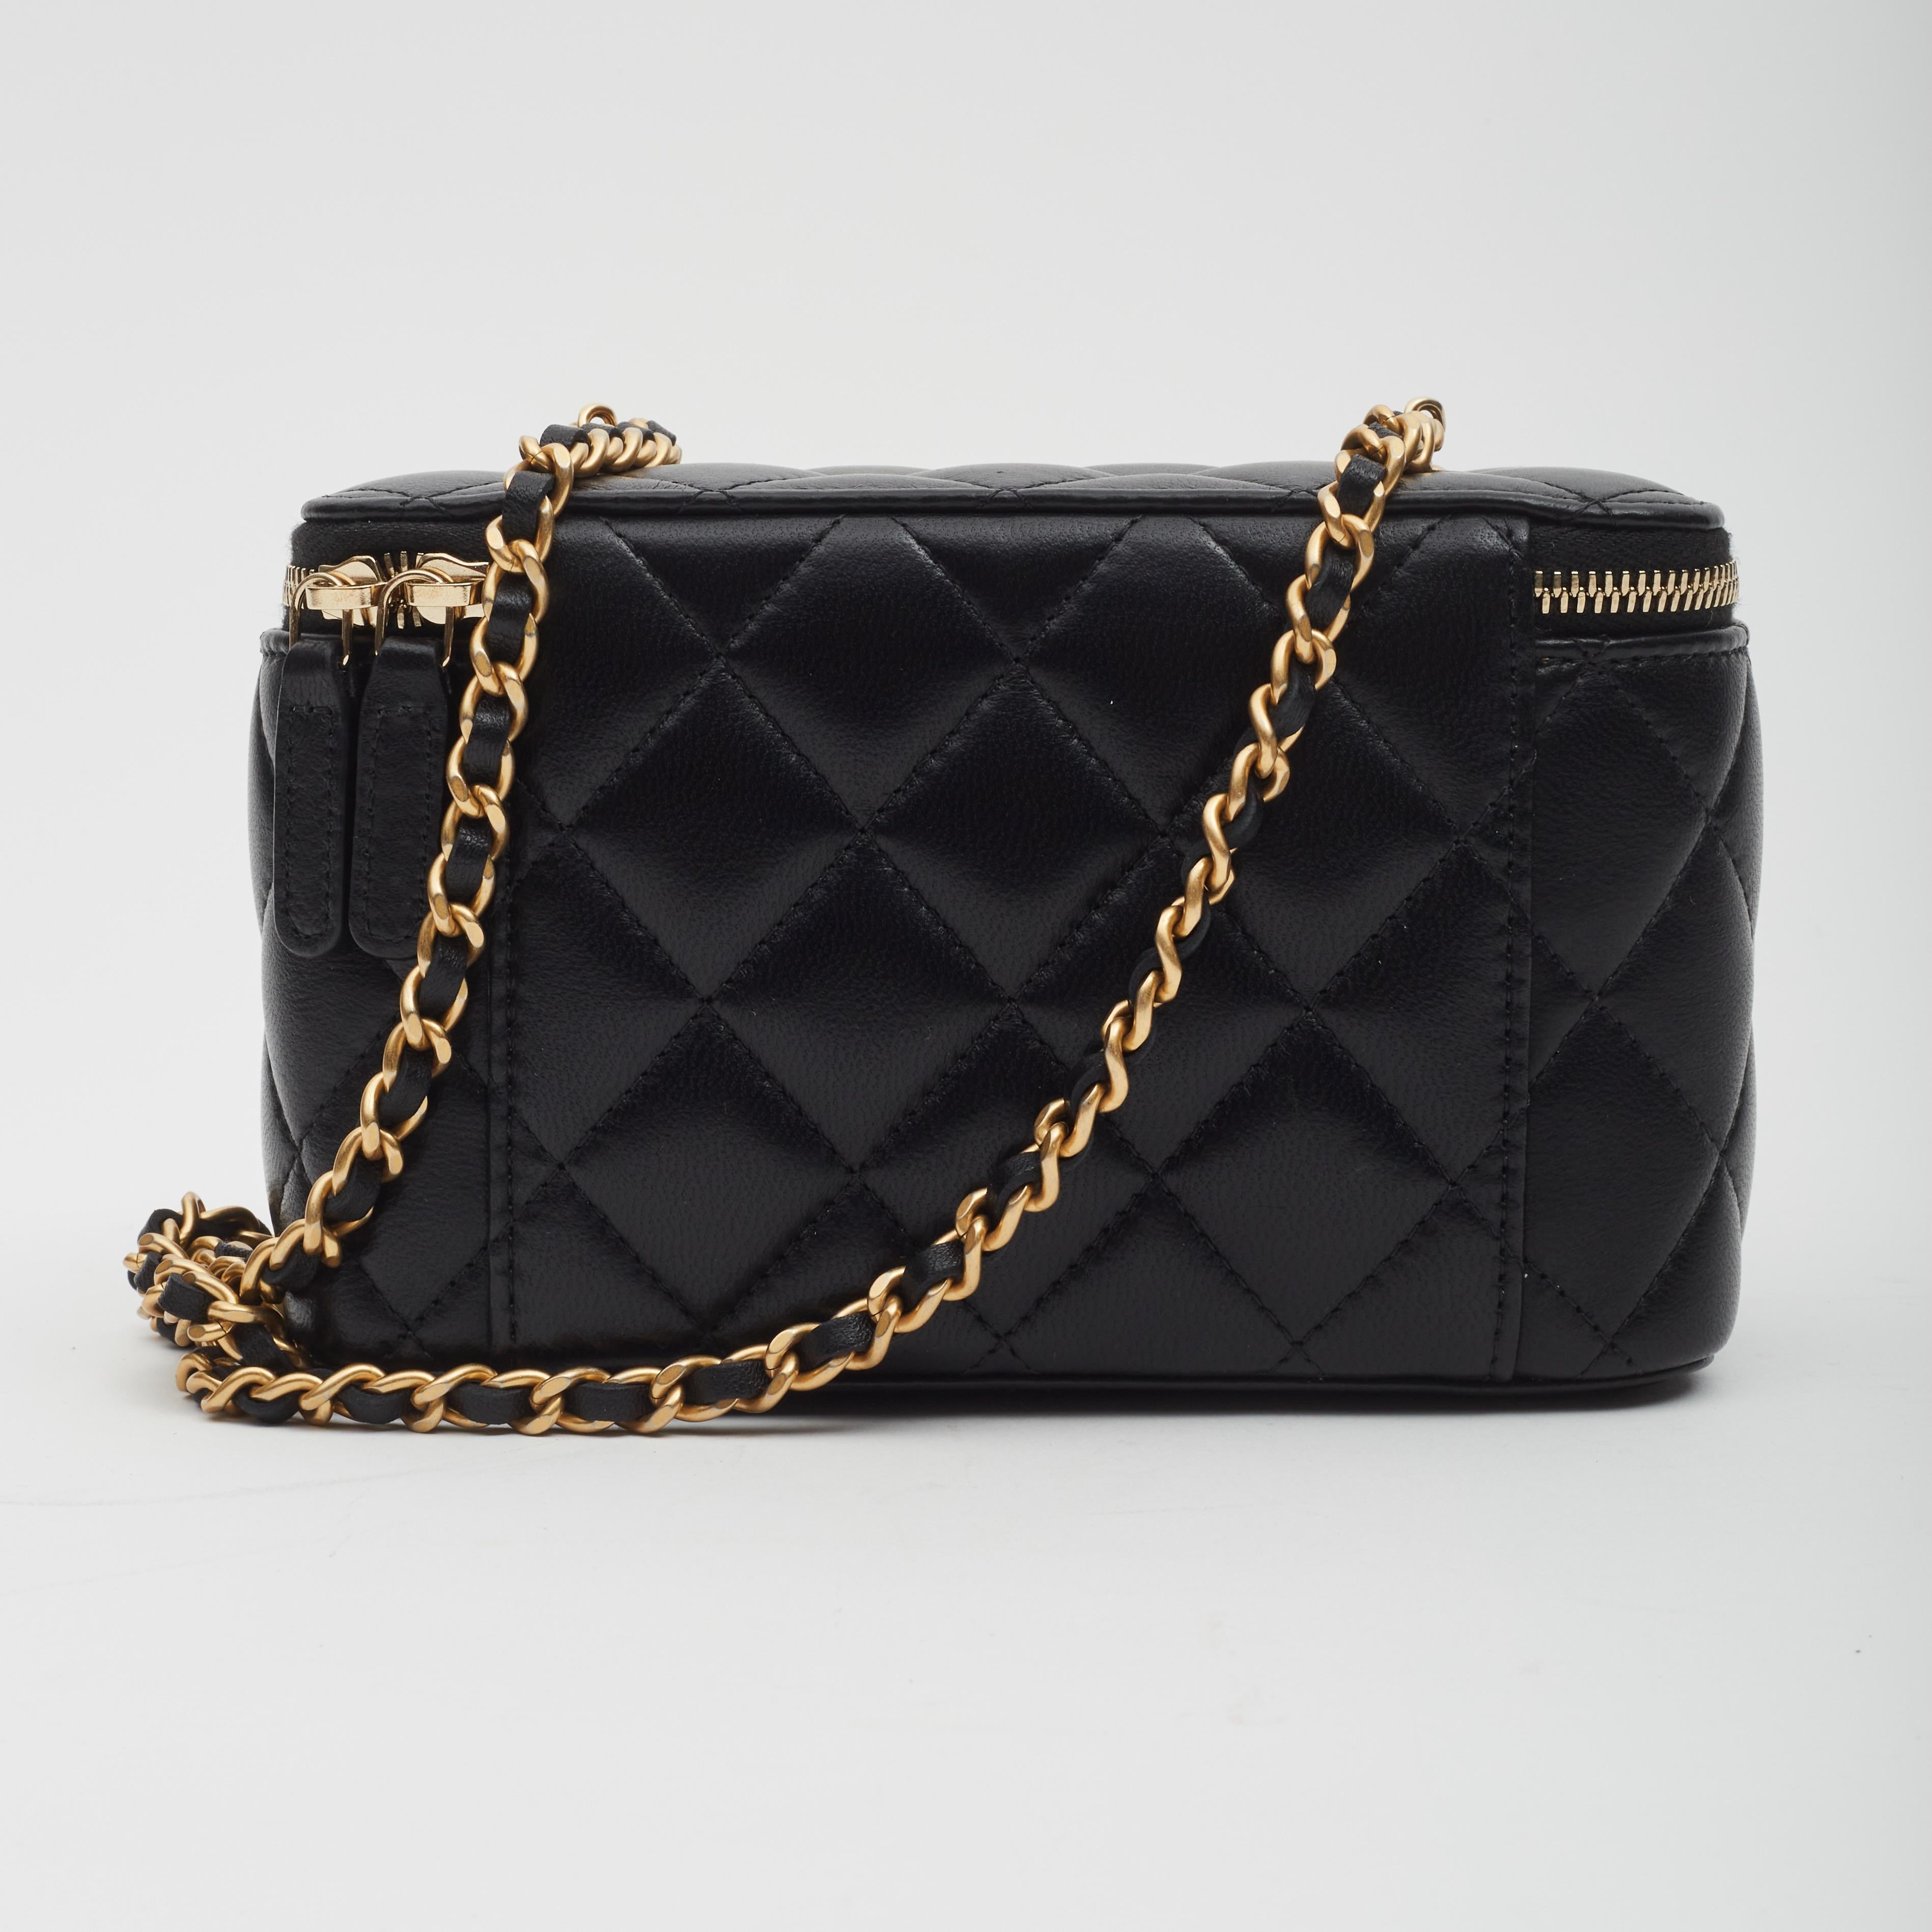 Chanel. From the 2022 Collection by Virginie Viard. Black Lambskin. Interlocking CC Logo & Quilted Pattern. Gold-Tone Hardware. Chain-Link Shoulder Strap. Leather Lining with Card Slots. Zip Closure at Top. Includes Box

Color: Black
Material: